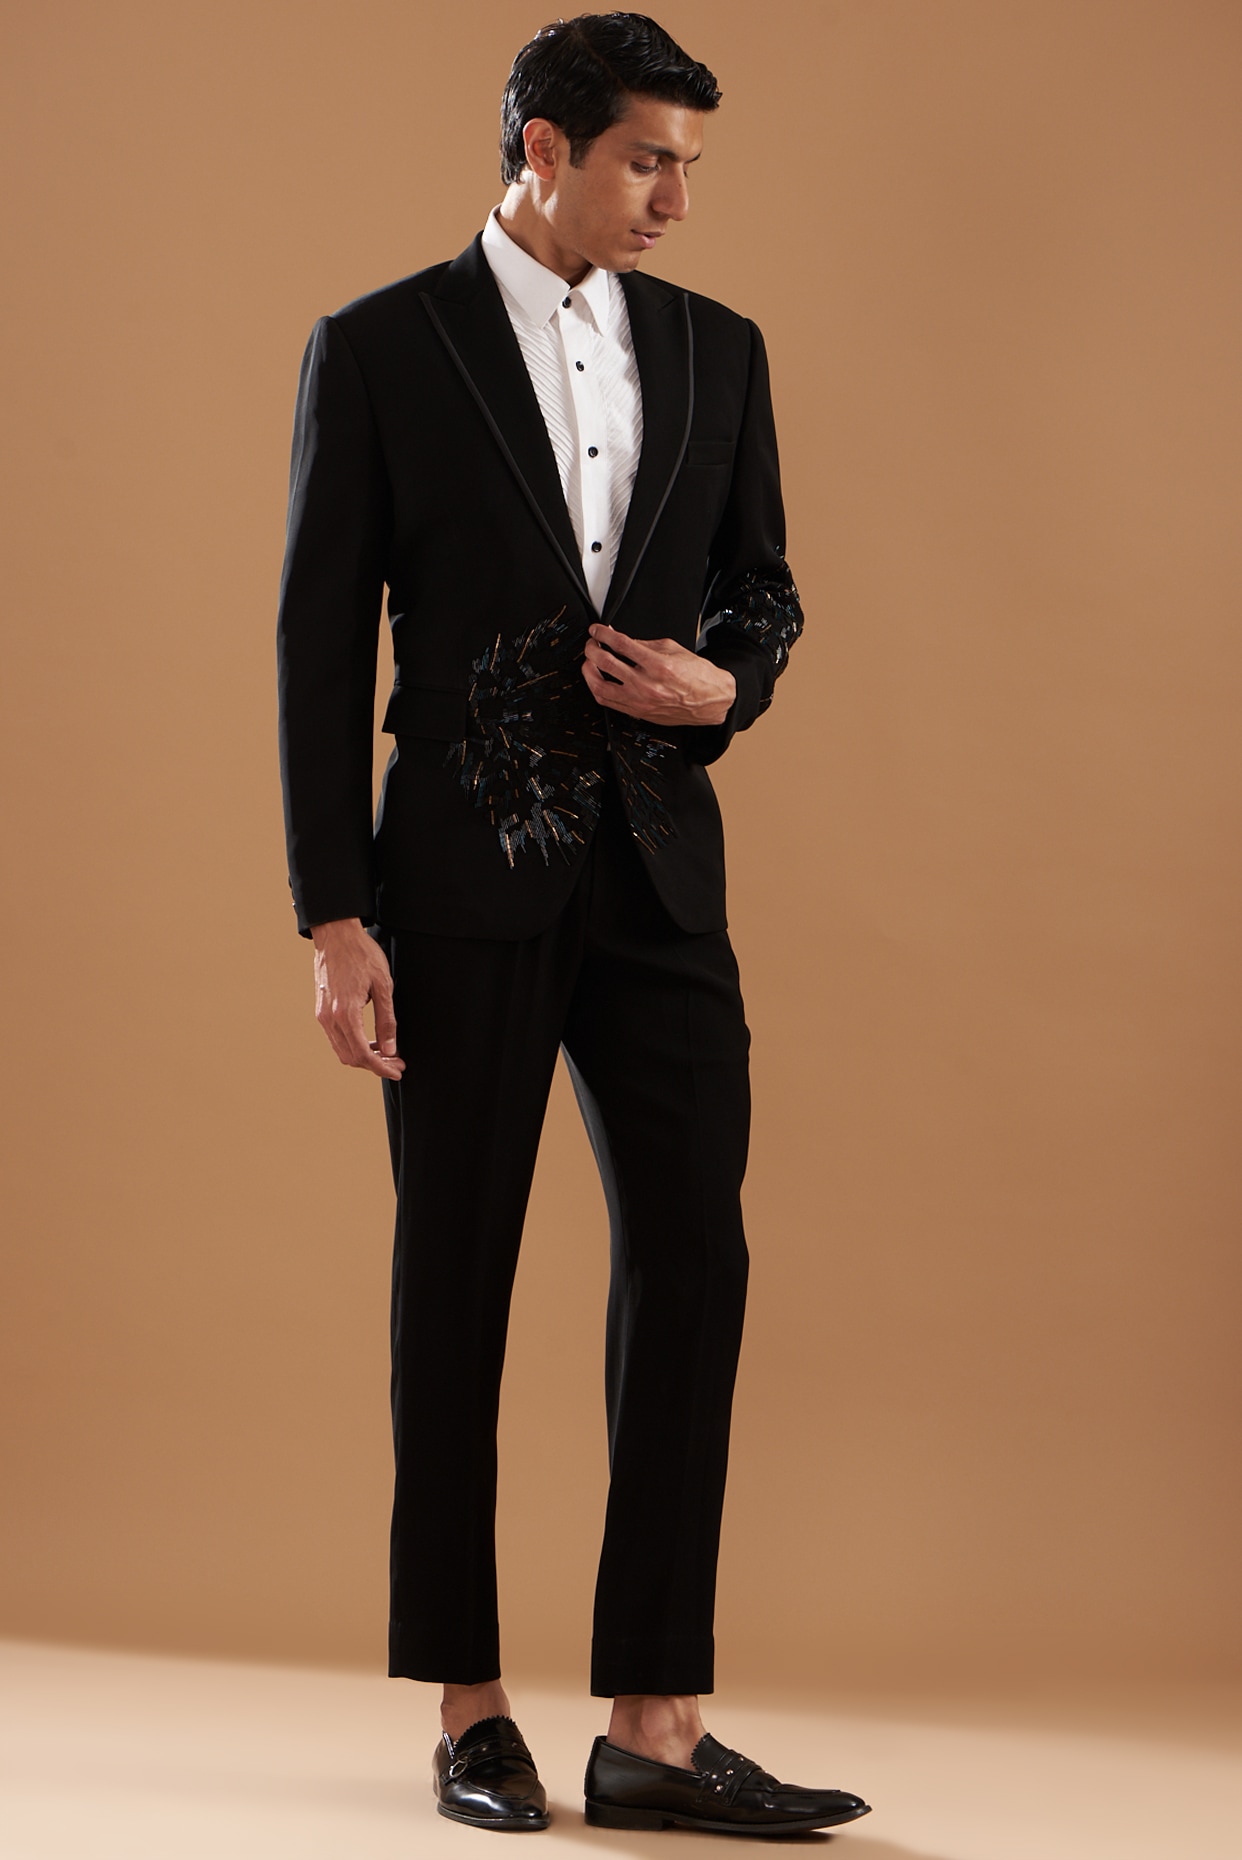 Italian Black Satin Black Wedding Suit For Wedding, Prom, And Formal Events  Custom Made Slim Fit Tuxedo Blazer And Pants Set From Onlywear, $112.28 |  DHgate.Com